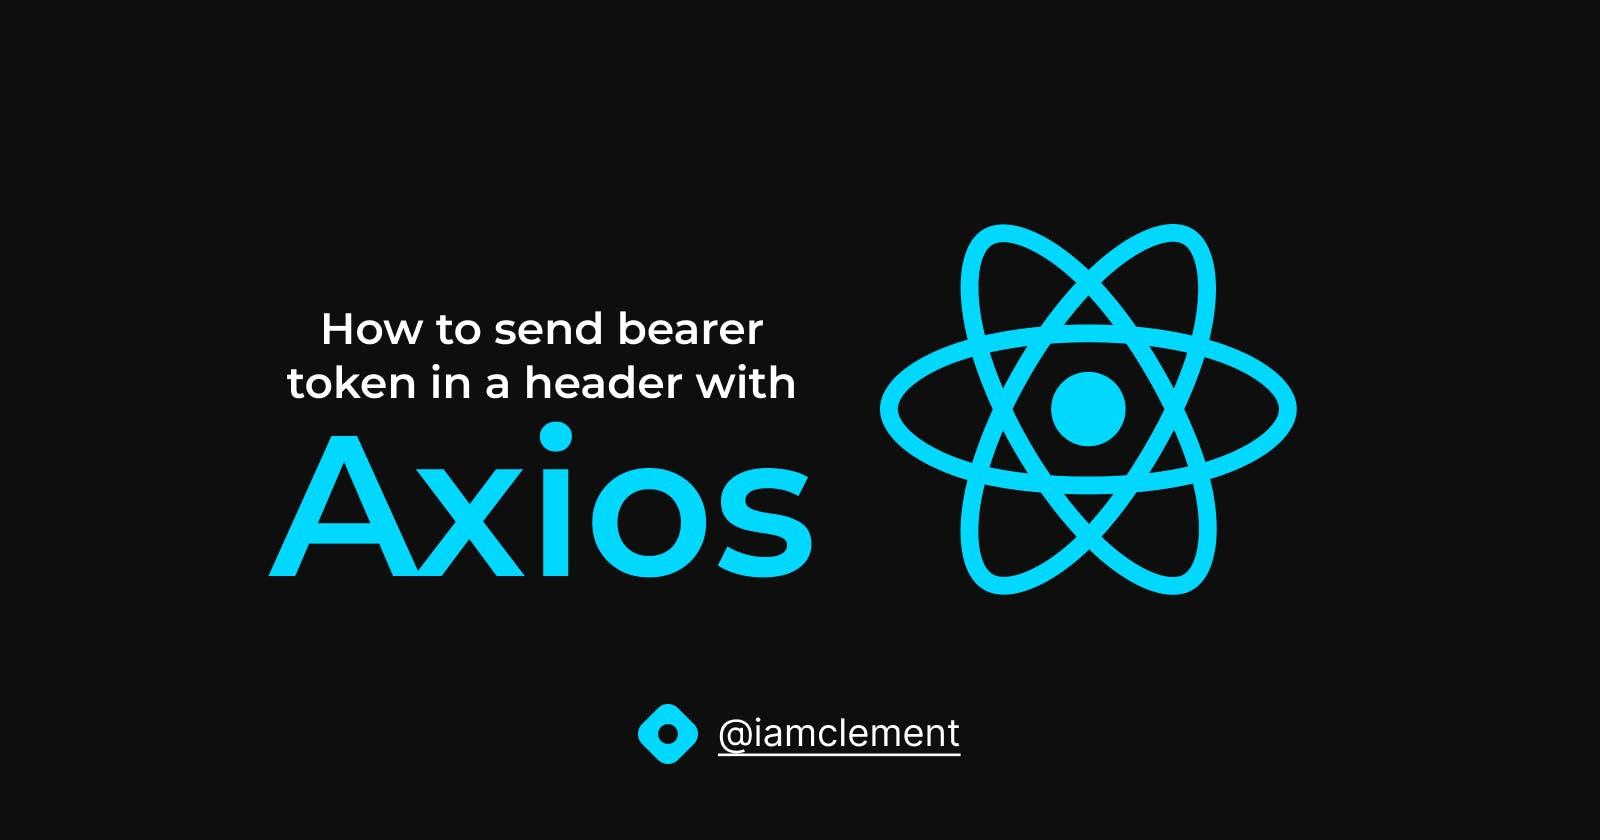 How to send bearer token in header with Axios